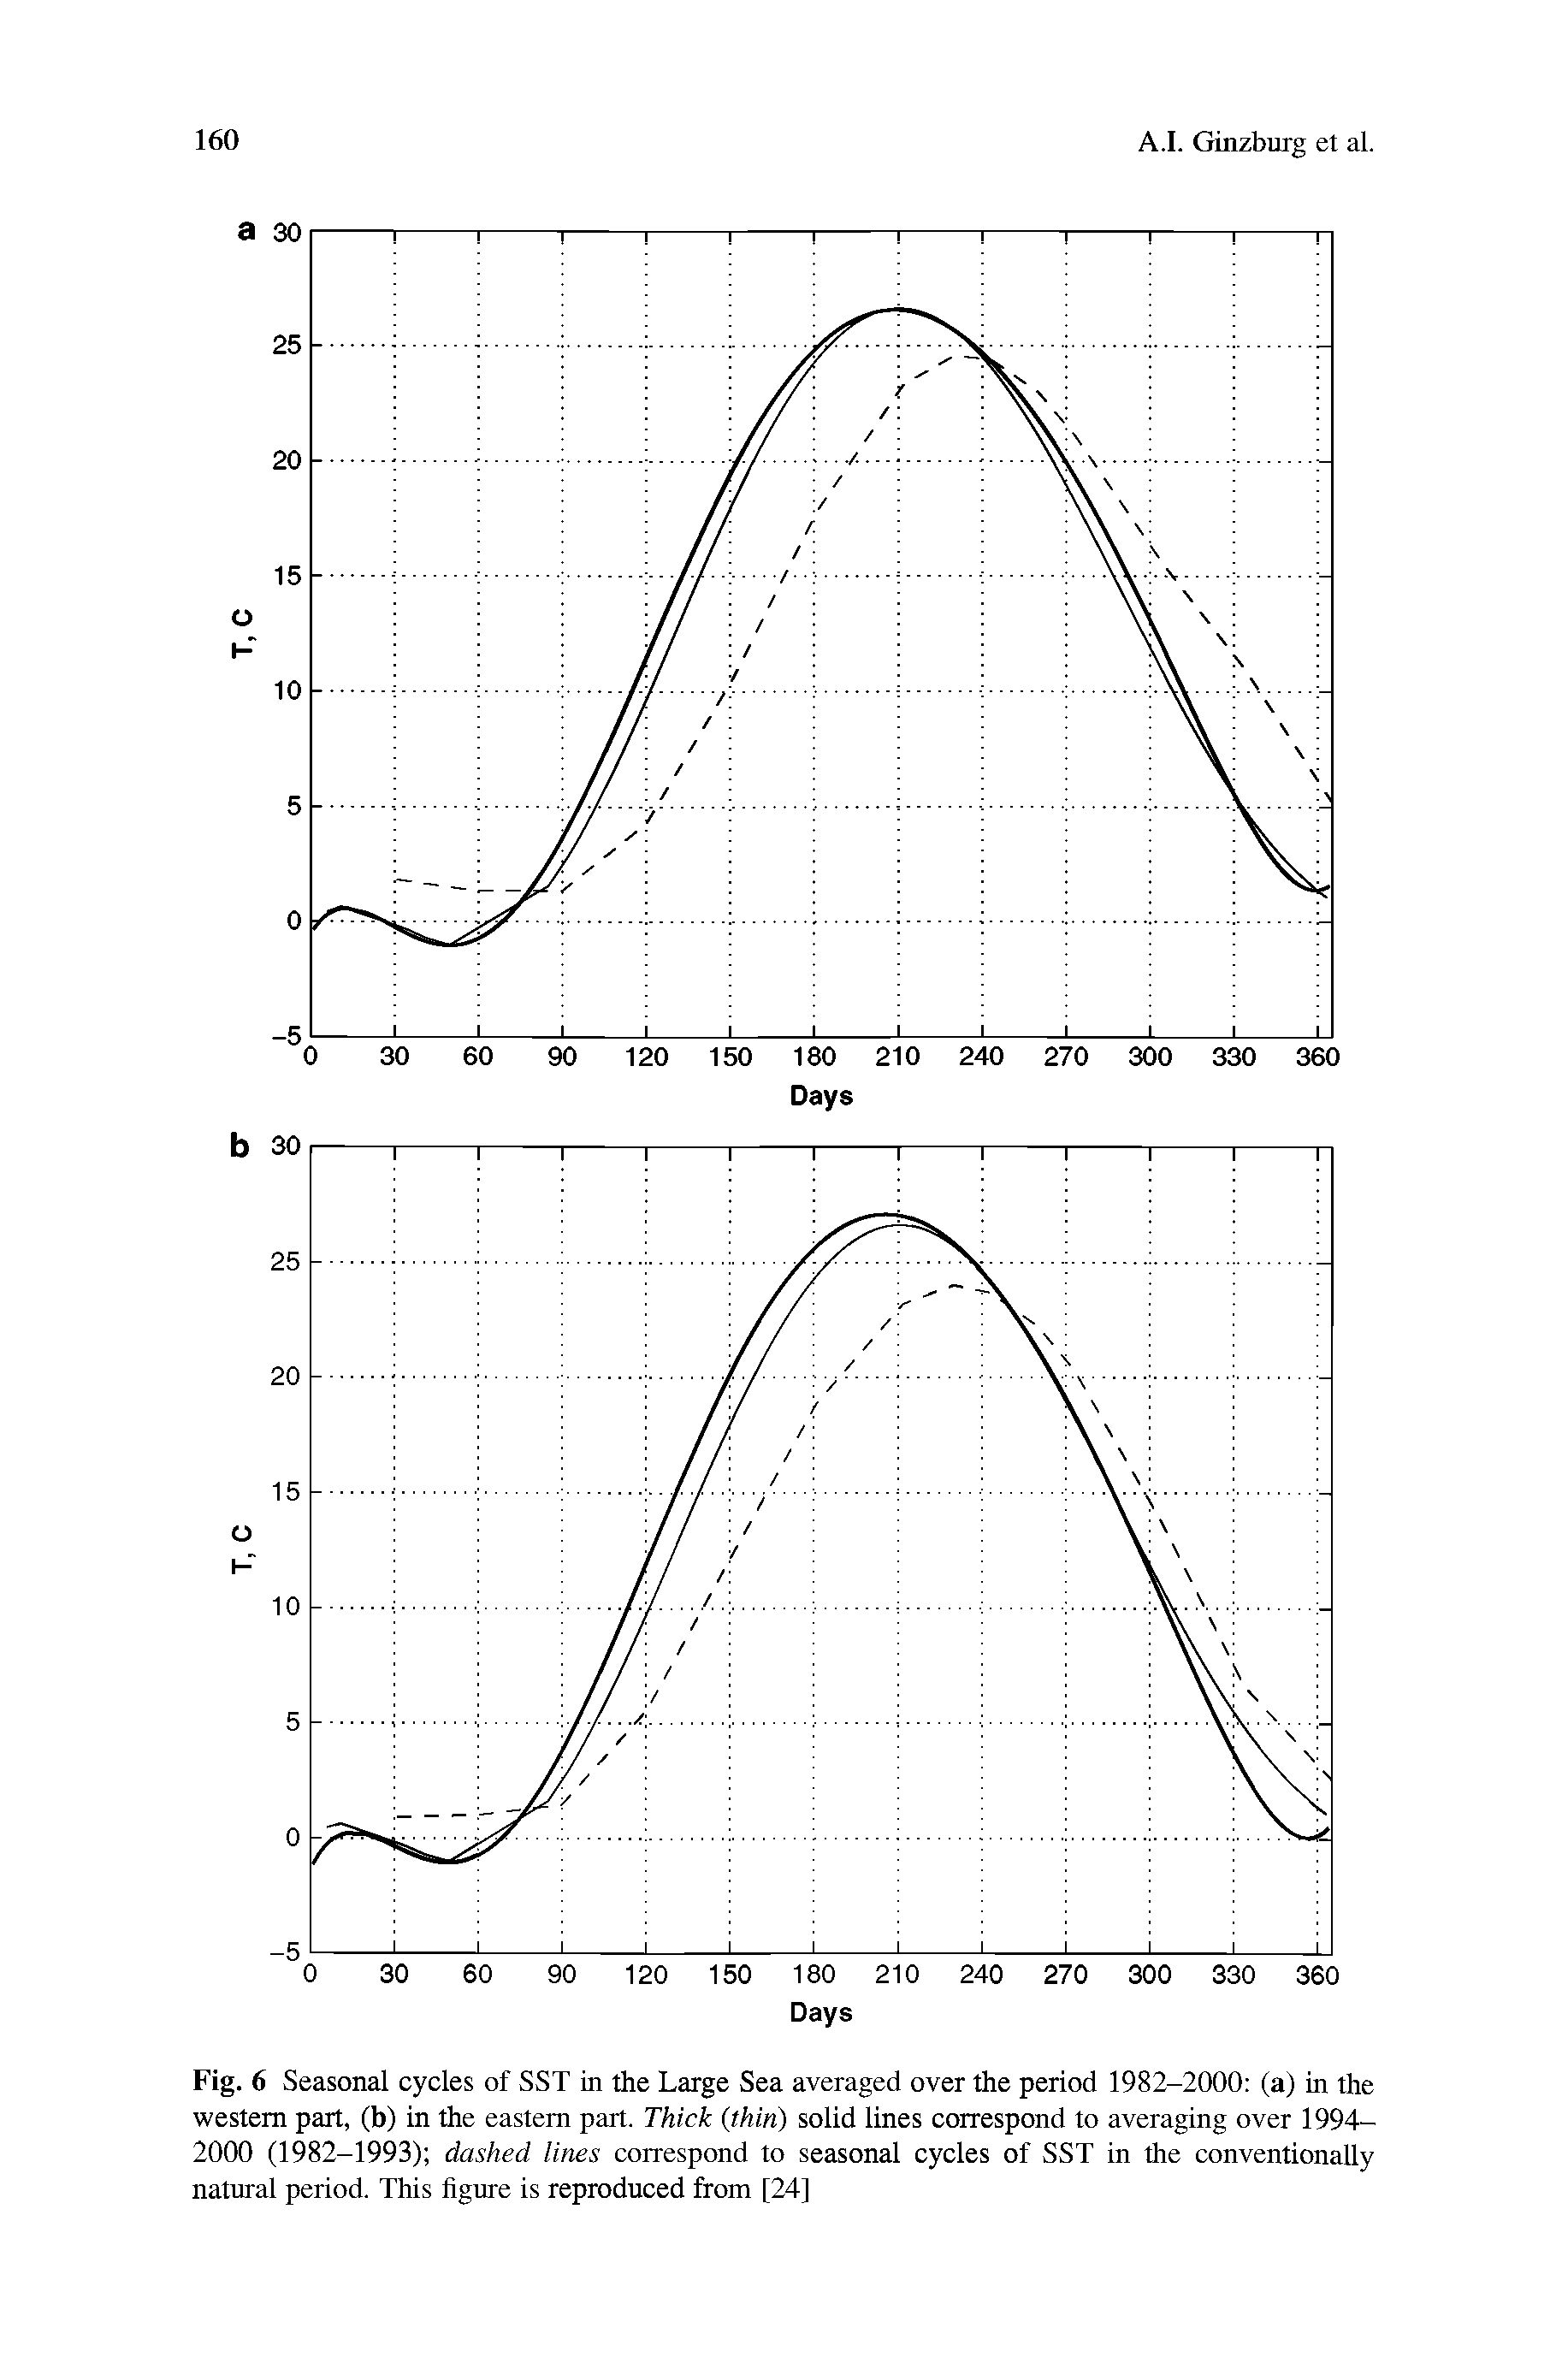 Fig. 6 Seasonal cycles of SST in the Large Sea averaged over the period 1982-2000 (a) in the western part, (b) in the eastern part. Thick (thin) solid lines correspond to averaging over 1994— 2000 (1982-1993) dashed lines correspond to seasonal cycles of SST in the conventionally natural period. This figure is reproduced from [24]...